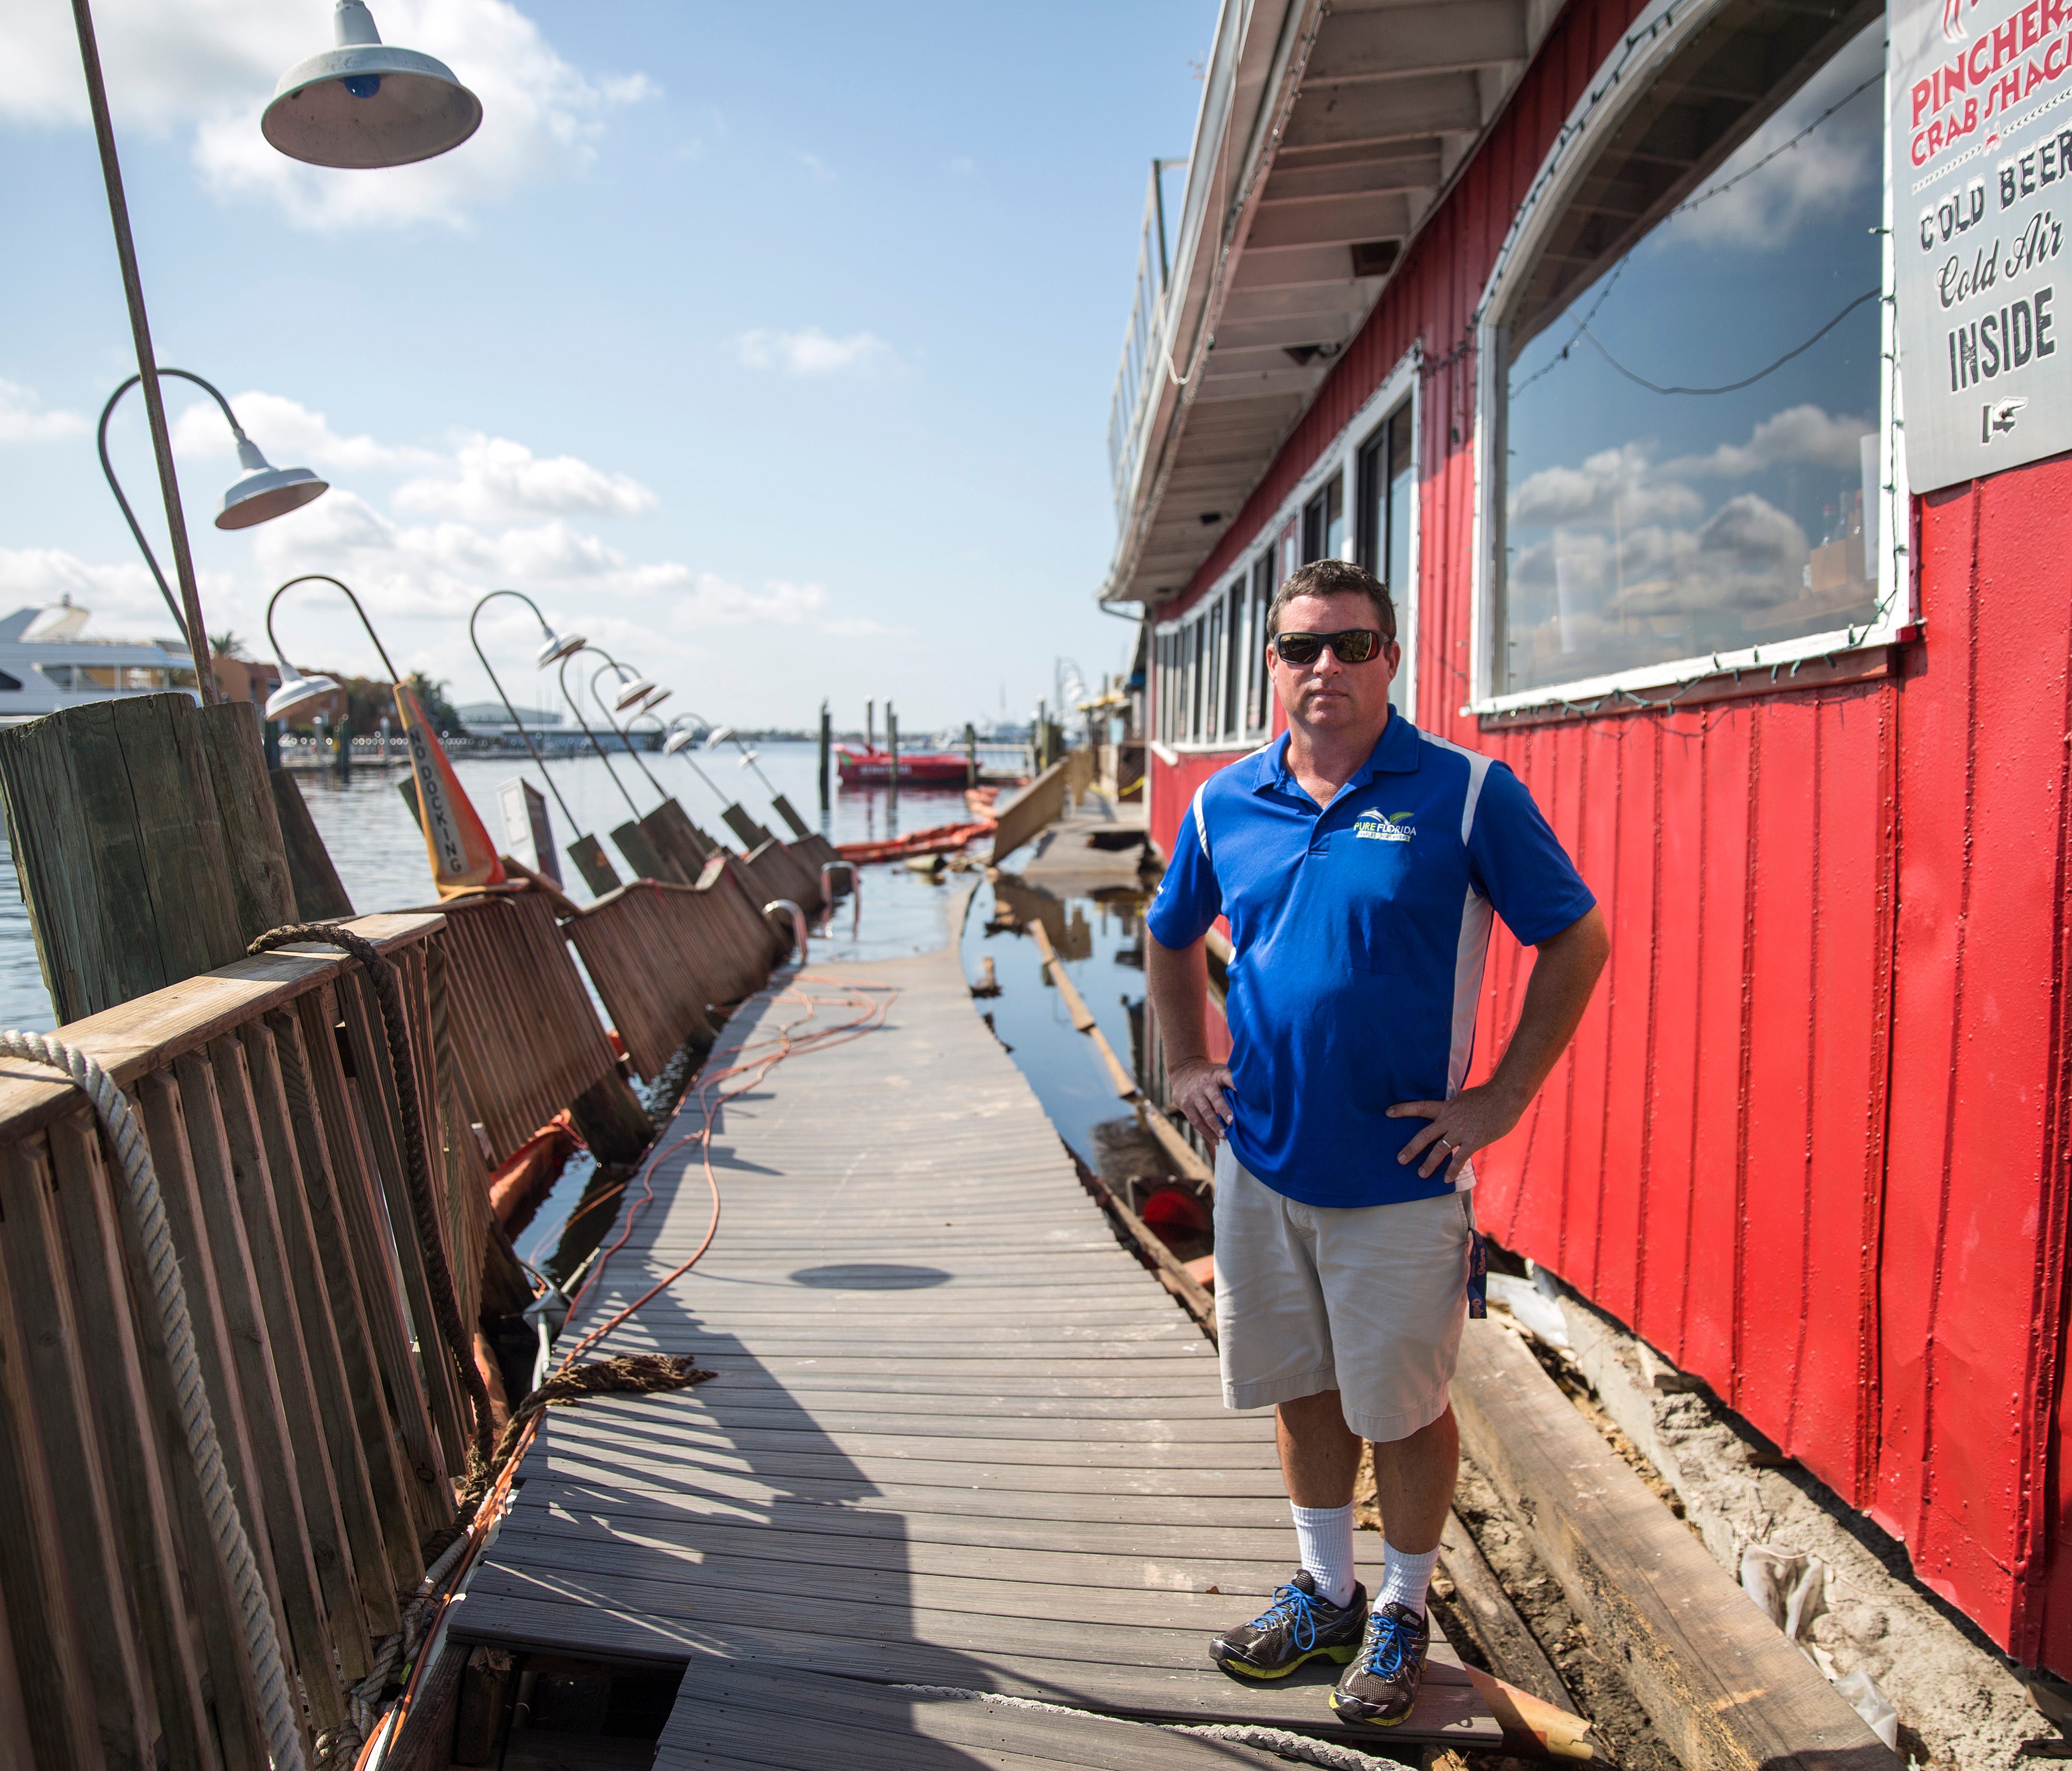 Captain Harry Julian, a founder of Pure Florida boat tours, stands by one of his docks on Tuesday, Sept. 19, 2017, that was left destroyed by Hurricane Irma at Tin City, a popular spot for tourists. The business also sustained damage to its water ves